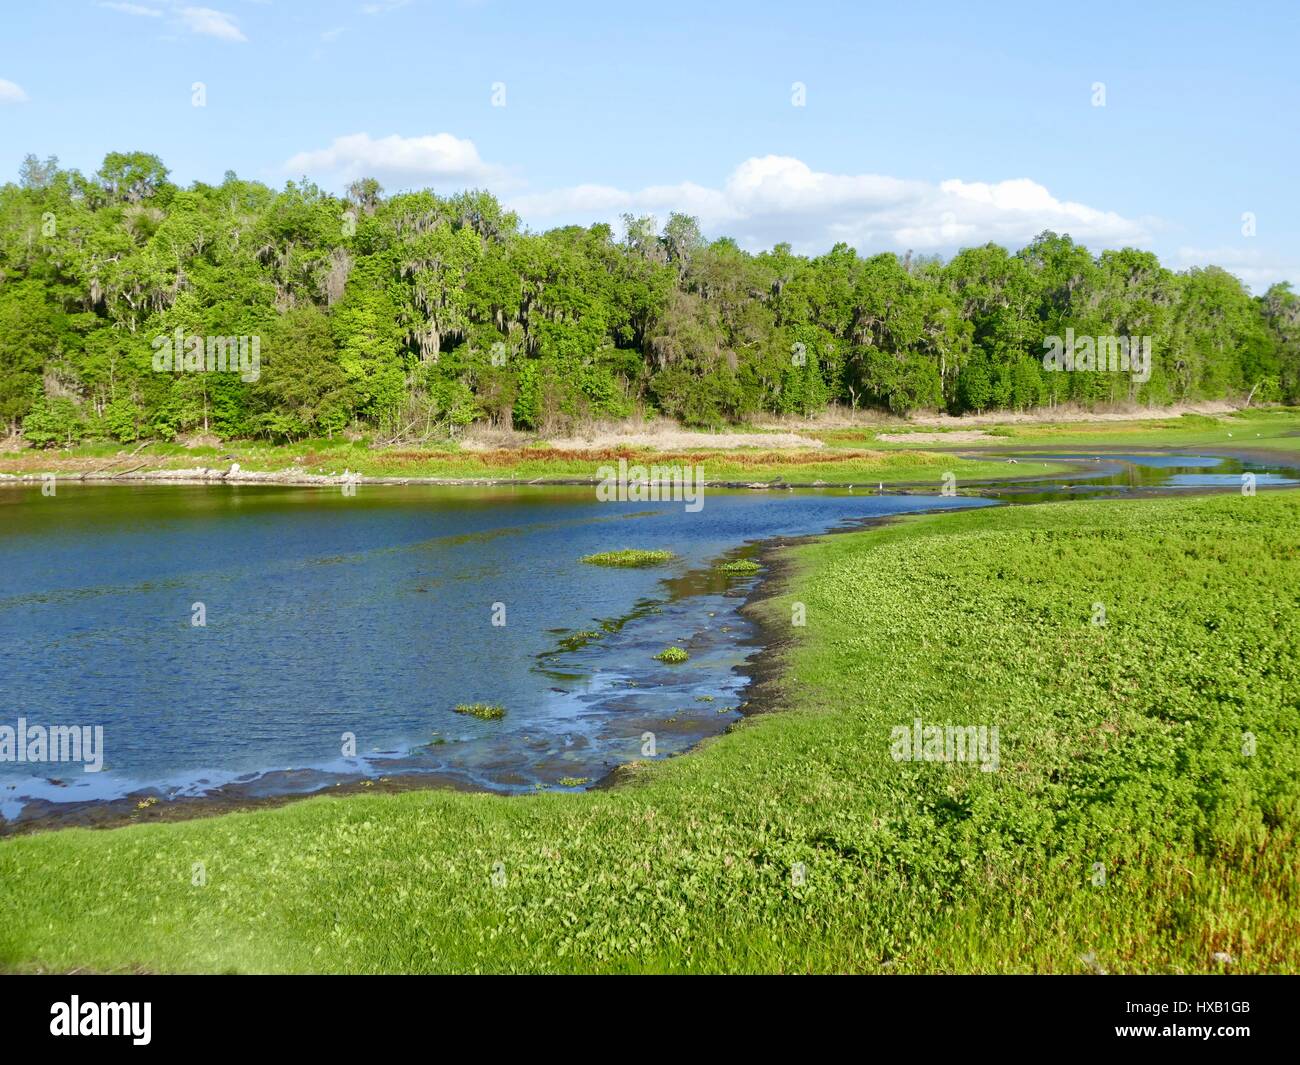 North Florida landscape with lake, hardwood trees, evergreens, and reflection in the water. Paynes Prairie Preserve State Park, Gainesville, FL, USA Stock Photo